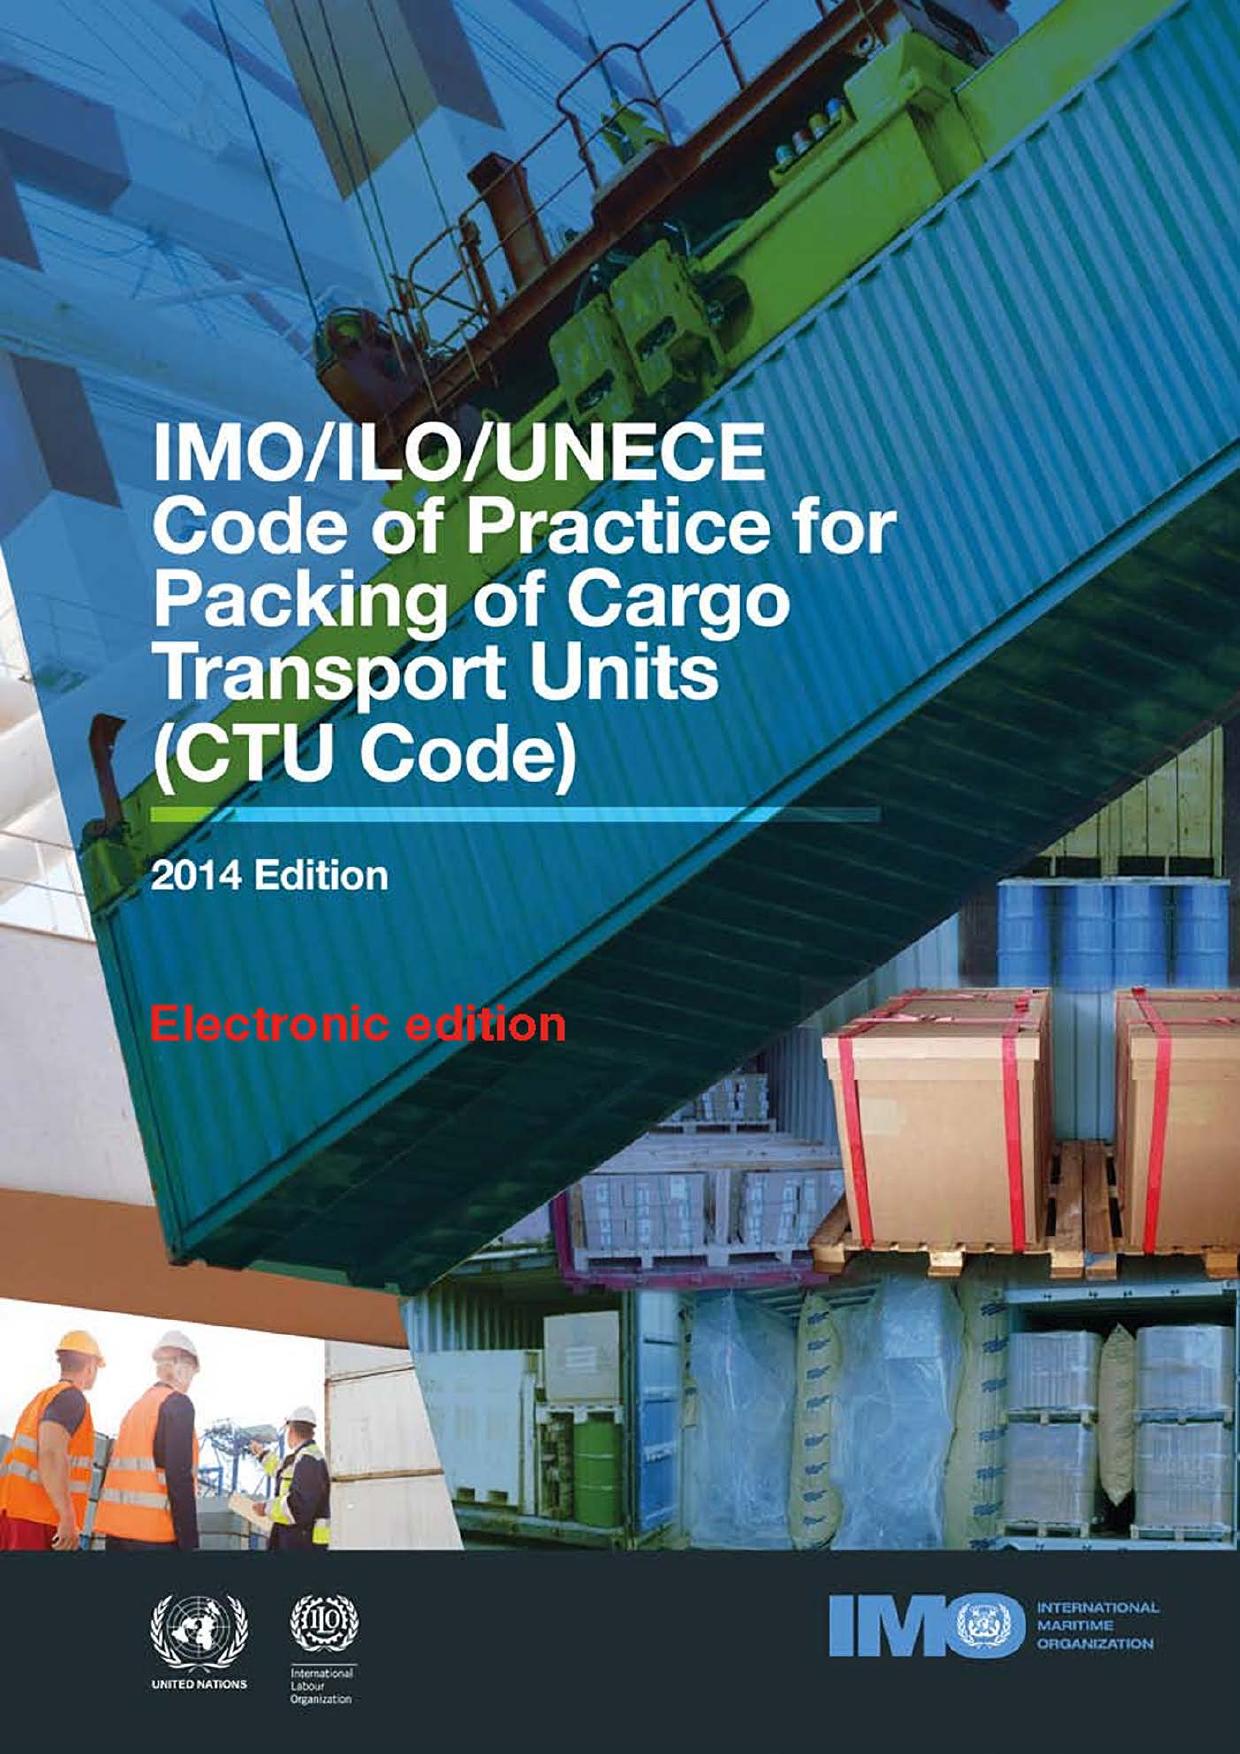 IMO/ILO/UNECE Code of Practice for Packing of Cargo Transport Units (CTU Code) by International Labour Office